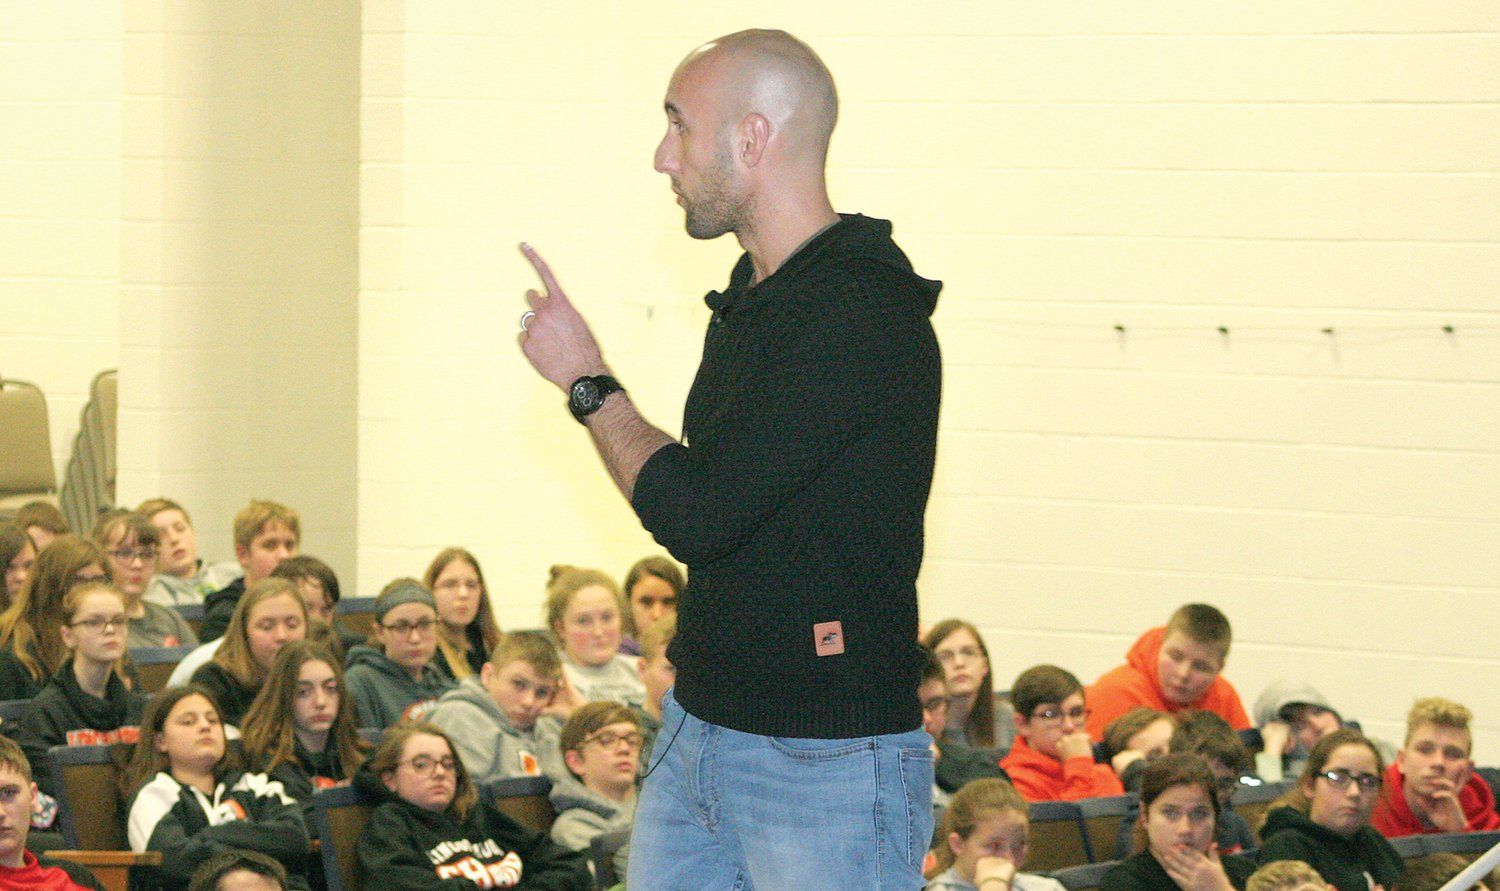 New Jersey native Sam Anthony Lucania shared his story of hope and recovery with Lincolnwood students in Raymond on Tuesday afternoon. He also visited schools in Hillsboro, Litchfield, and Nokomis and spoke at a public event Wednesday night at The Event Center in Taylor Springs.